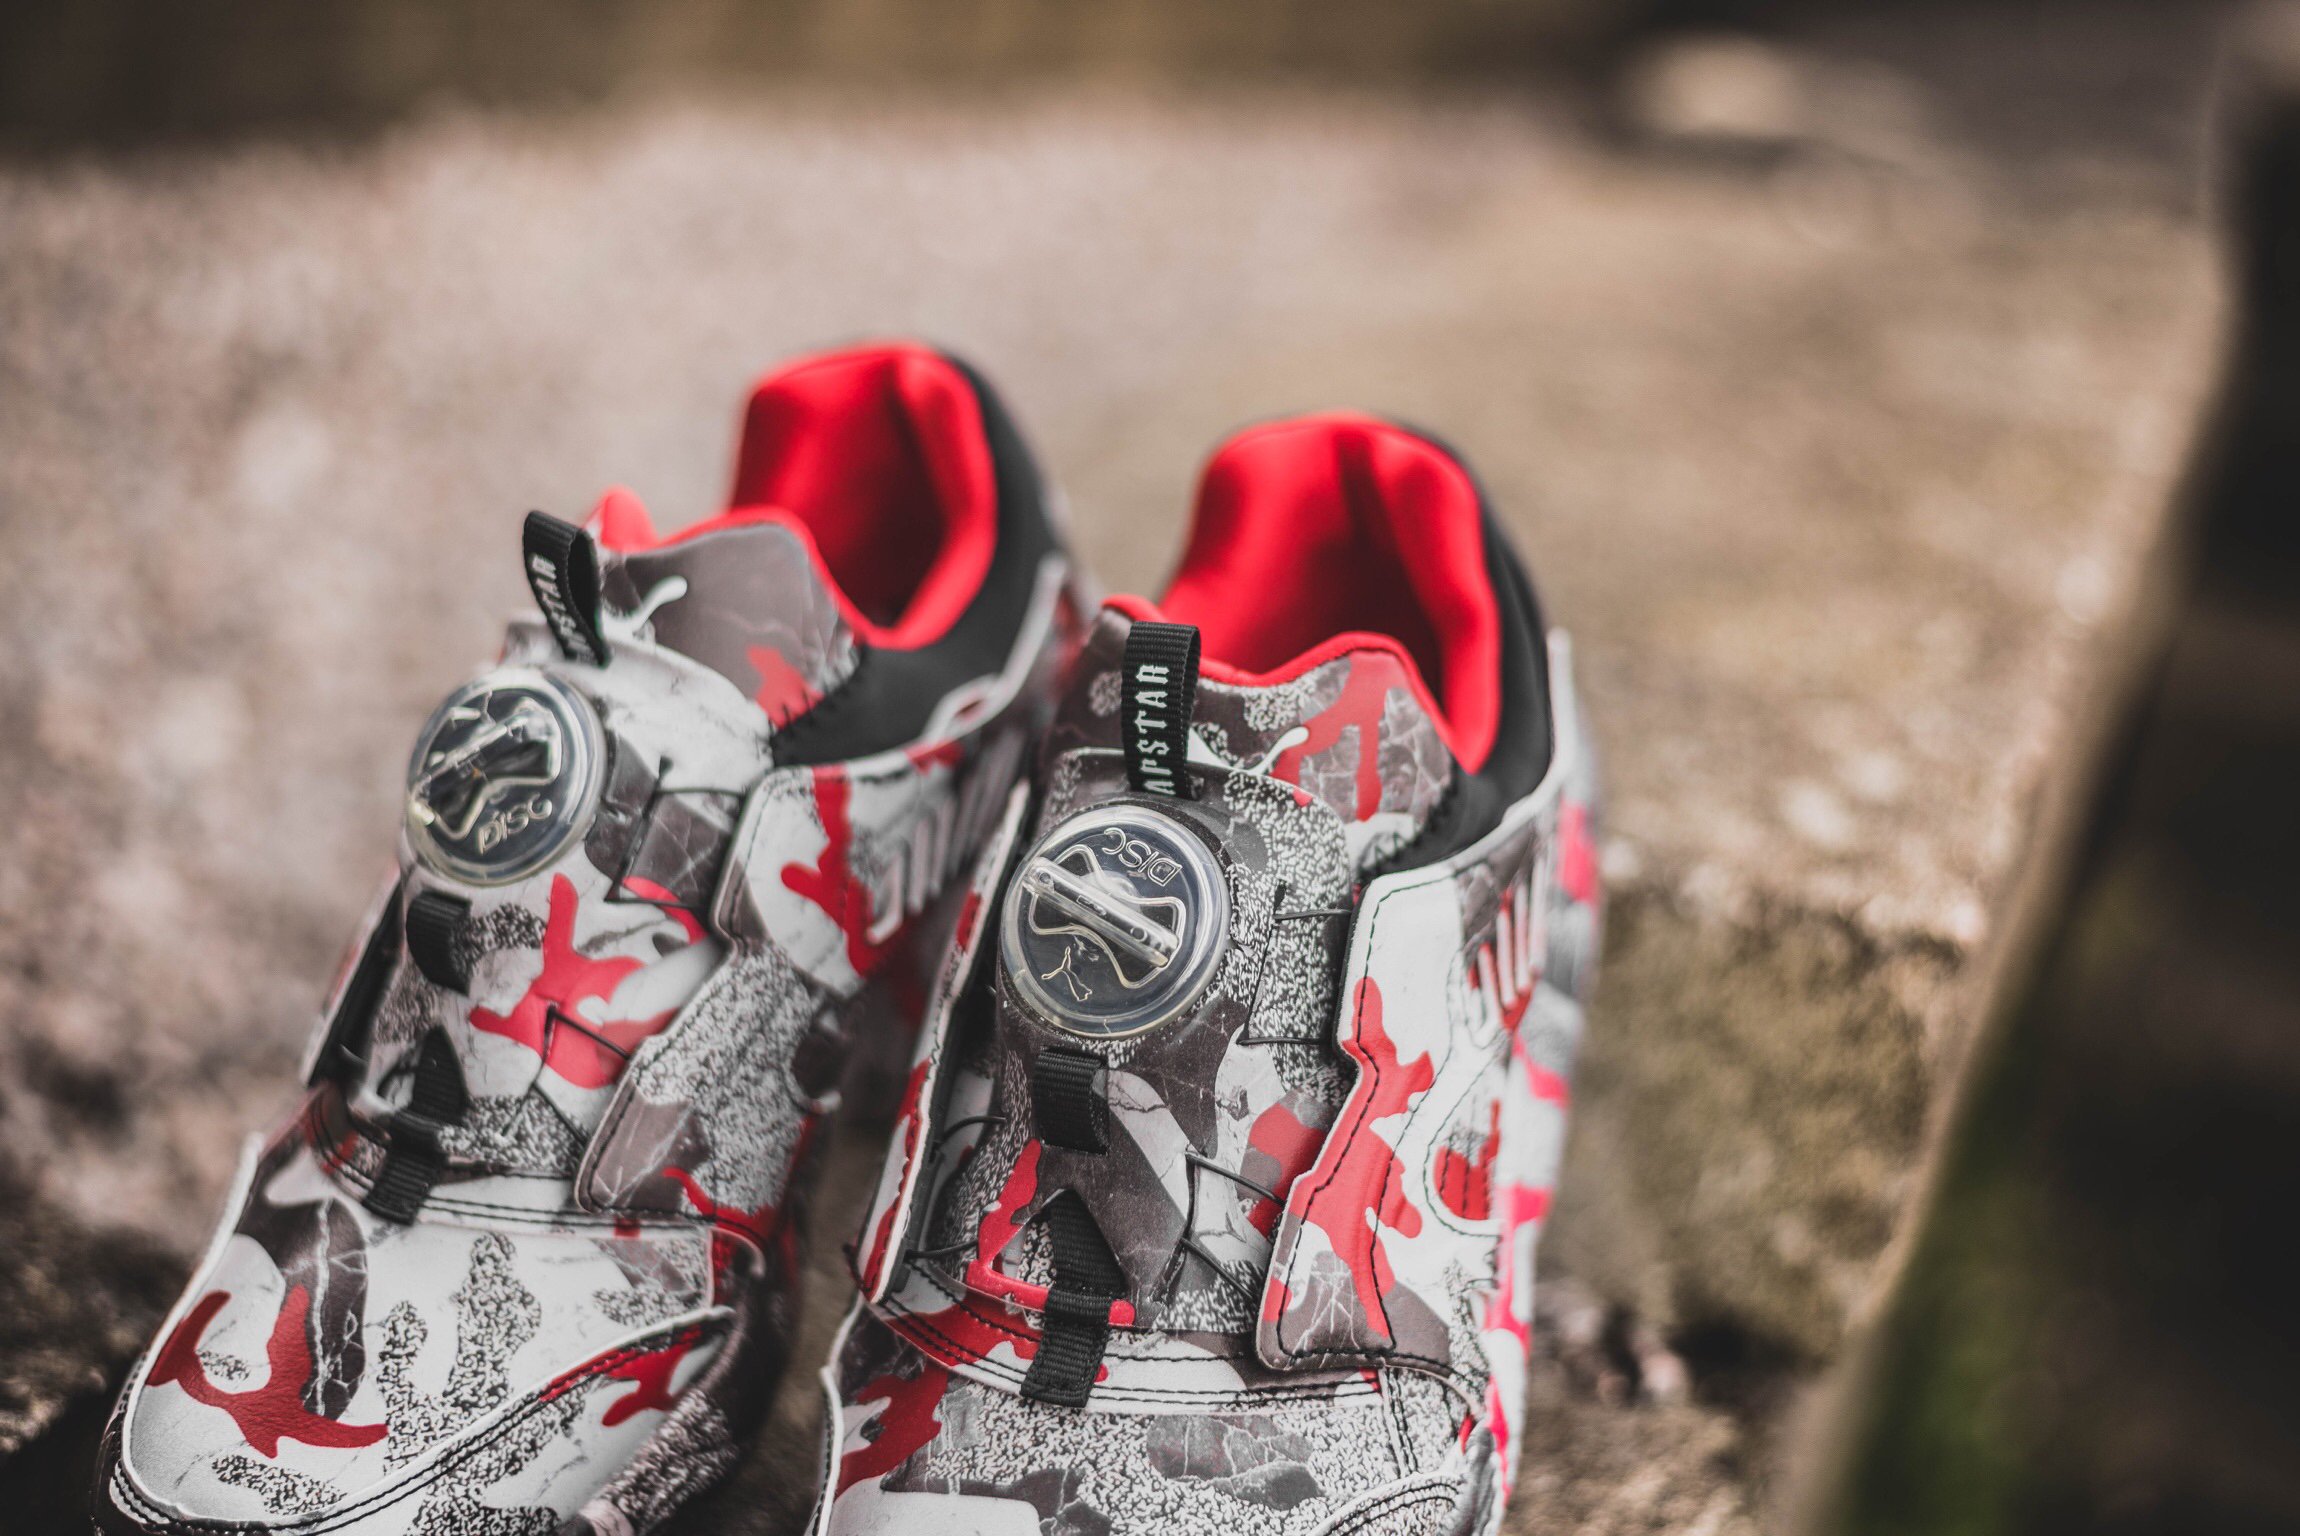 Atticus Permeabilidad azúcar HANON on Twitter: "Puma Disc Blaze Camo x Trapstar is available to buy  ONLINE now! #hanon #puma https://t.co/Dh8lsQ0dTF https://t.co/zeLKod4dfB" /  Twitter